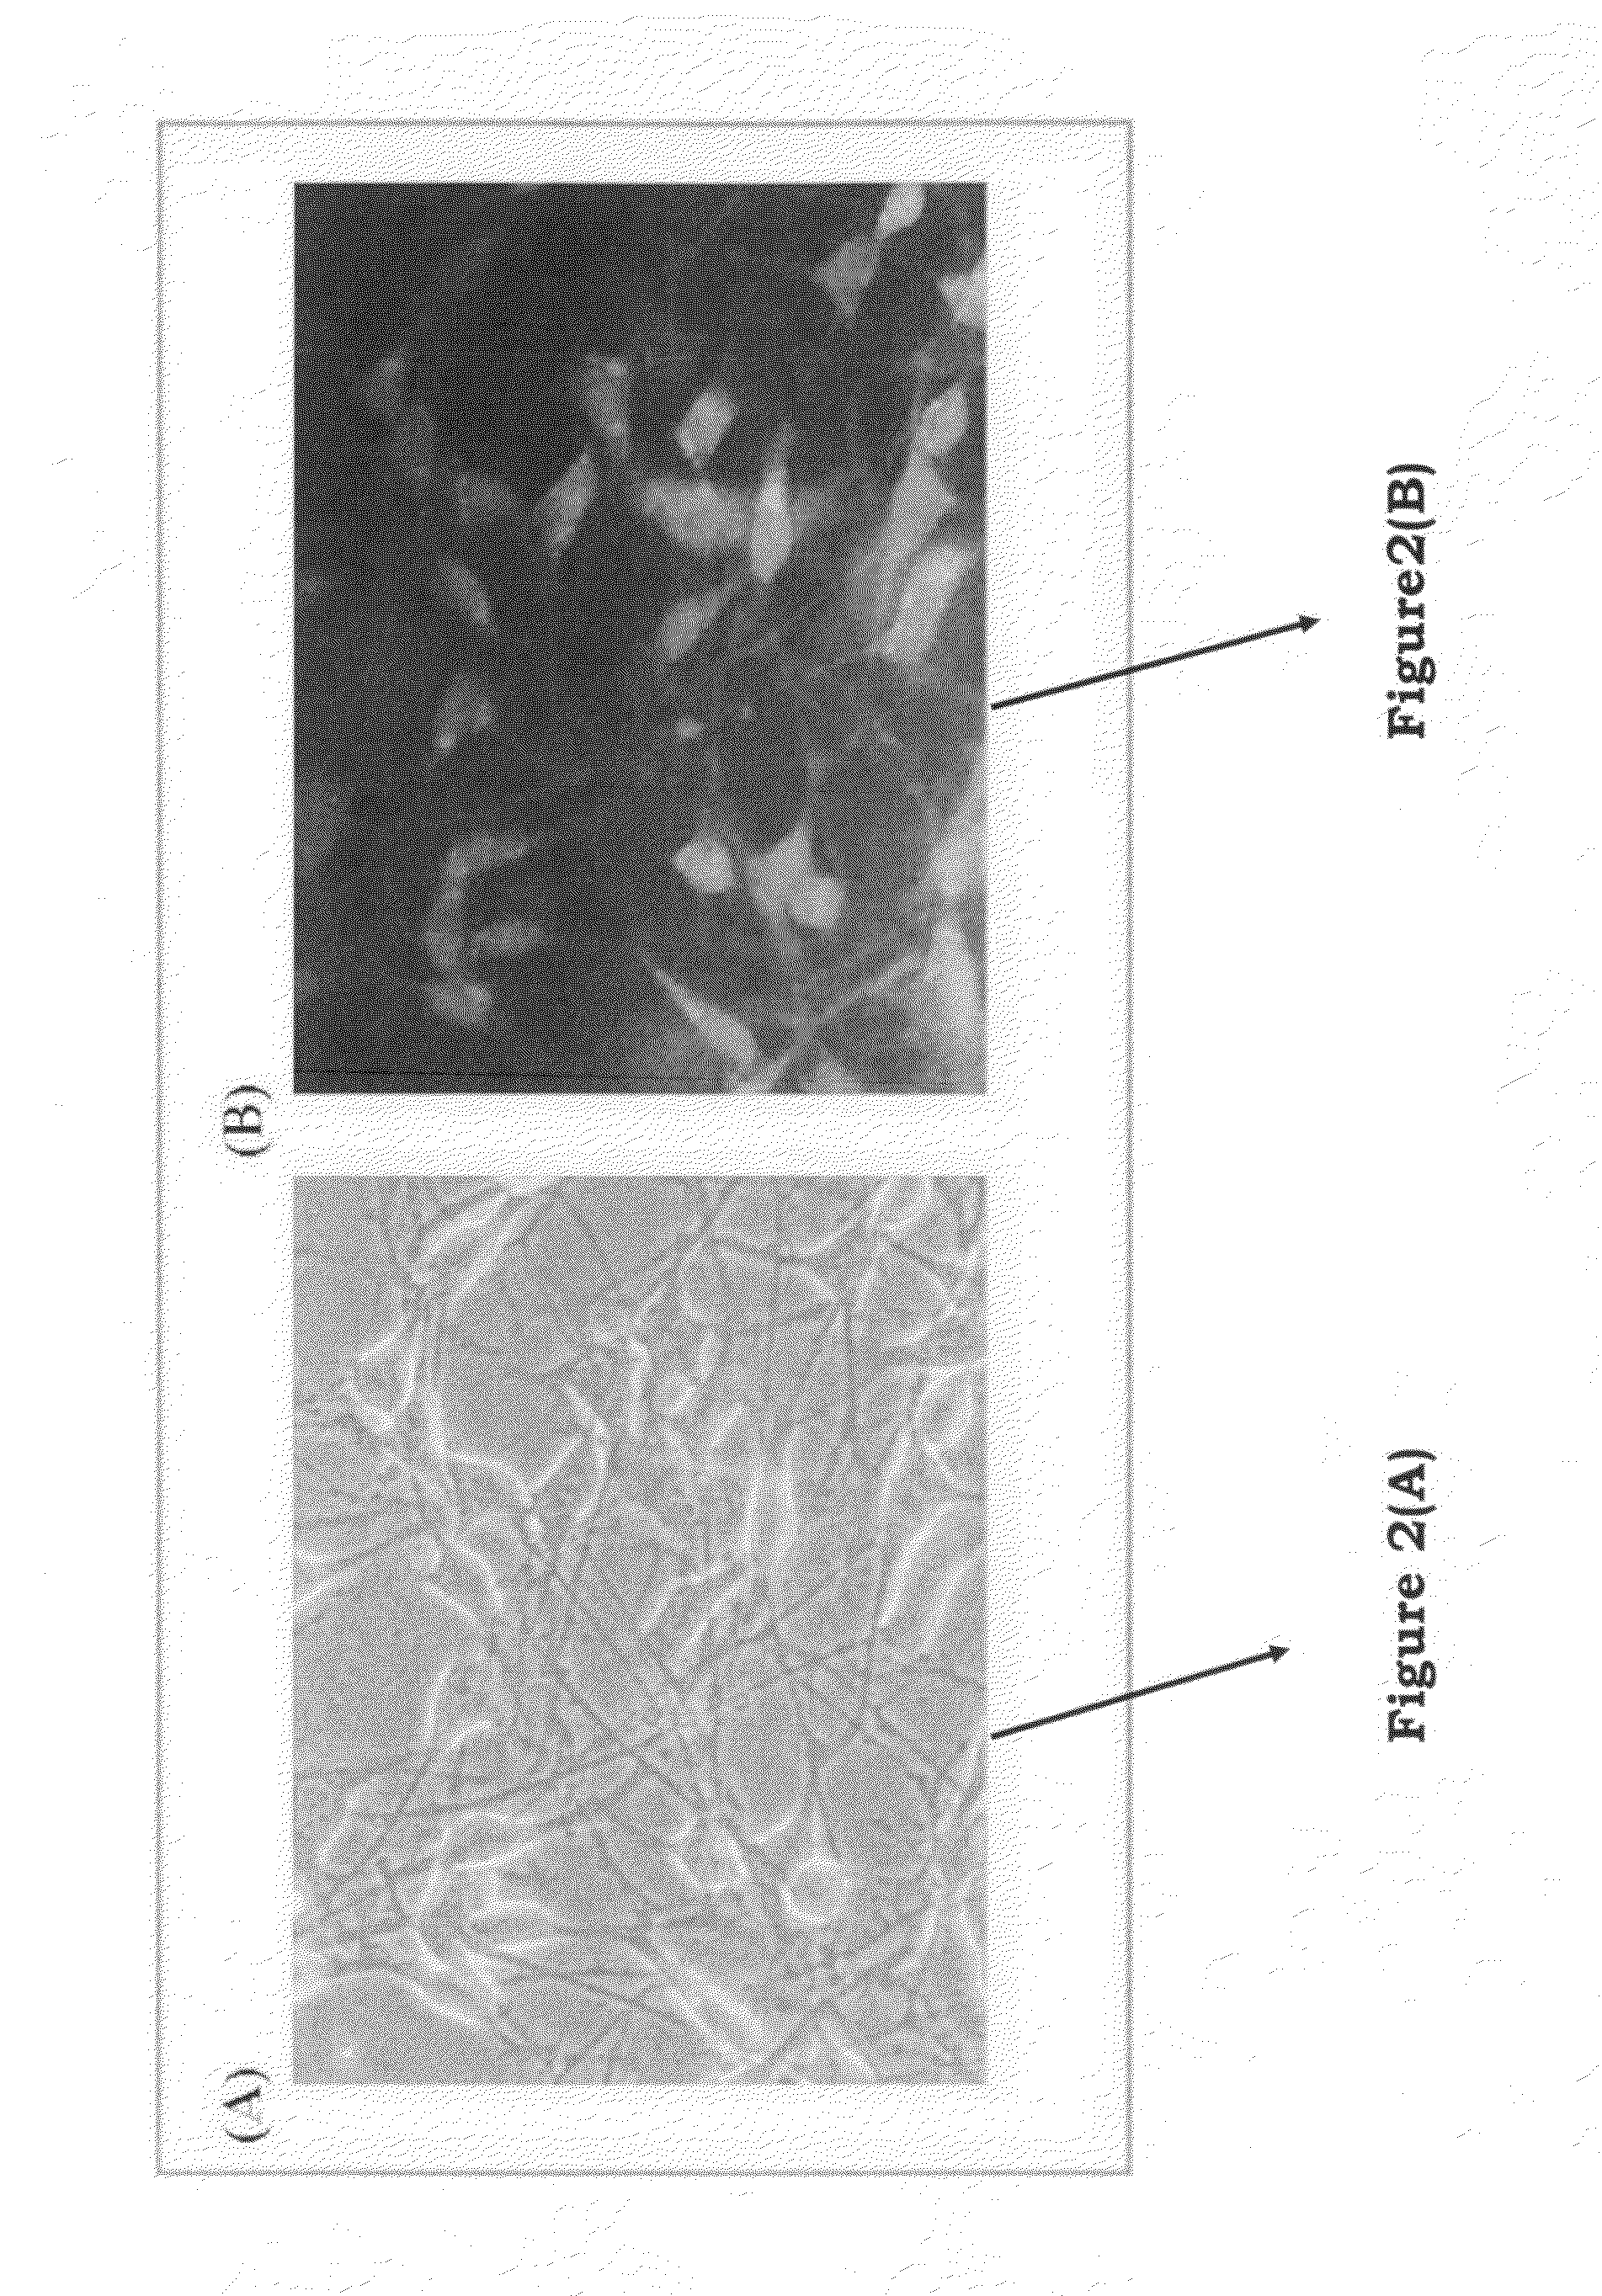 Method for performing genetic modification under a drug-free environment and components thereof